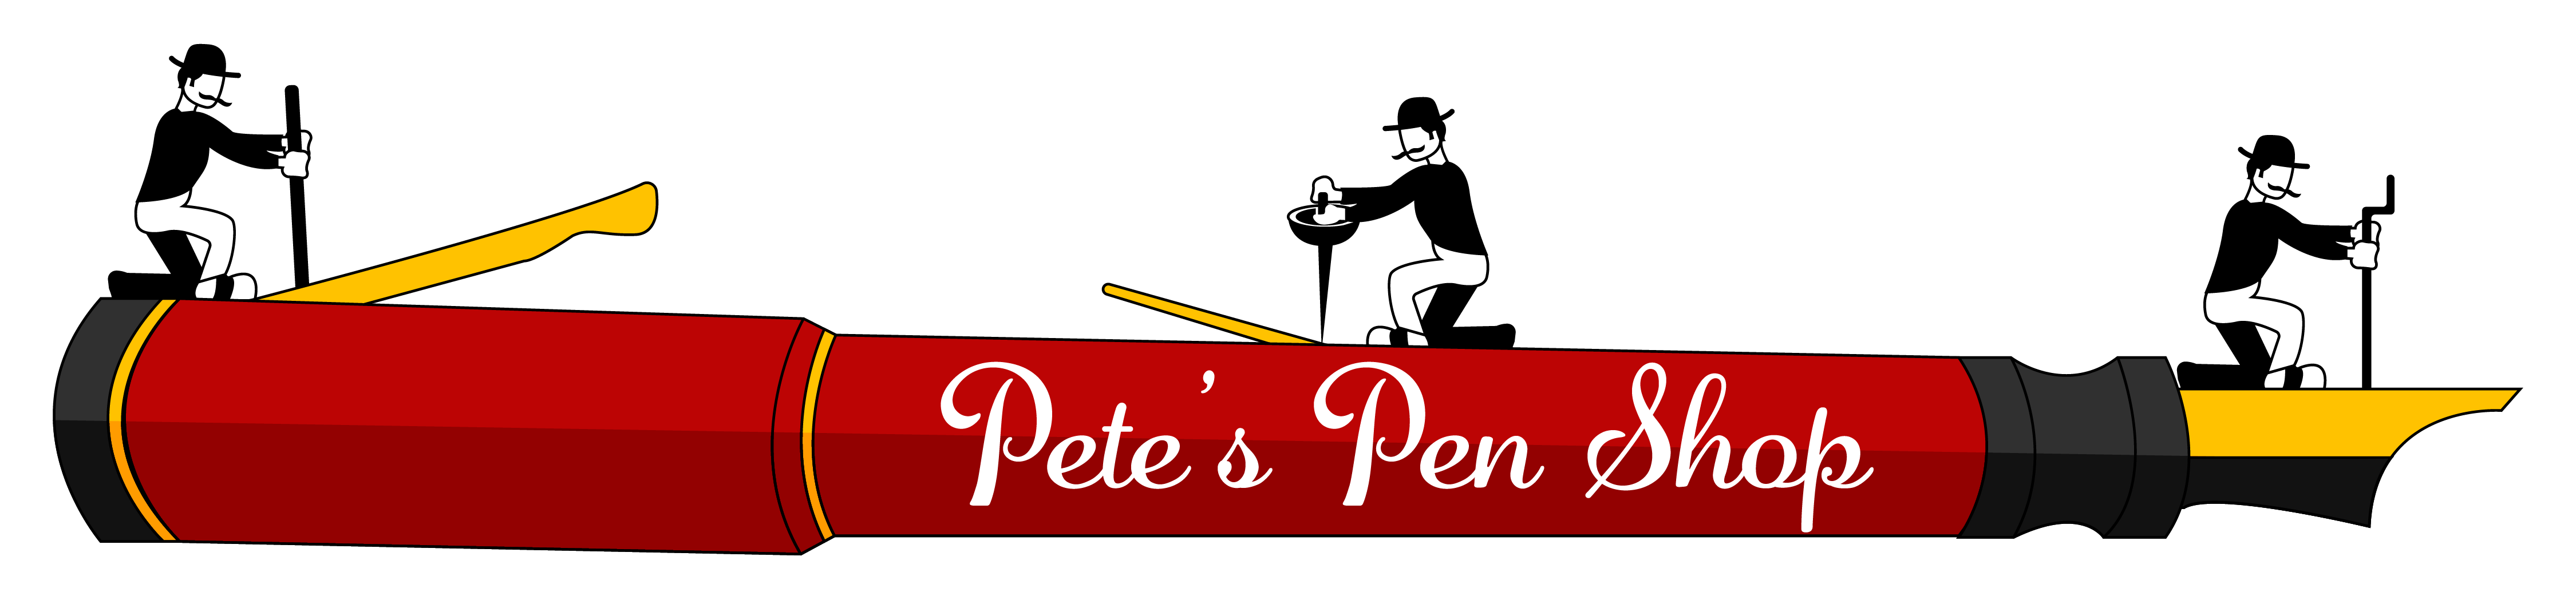 WELCOME TO PETE'S PEN SHOP